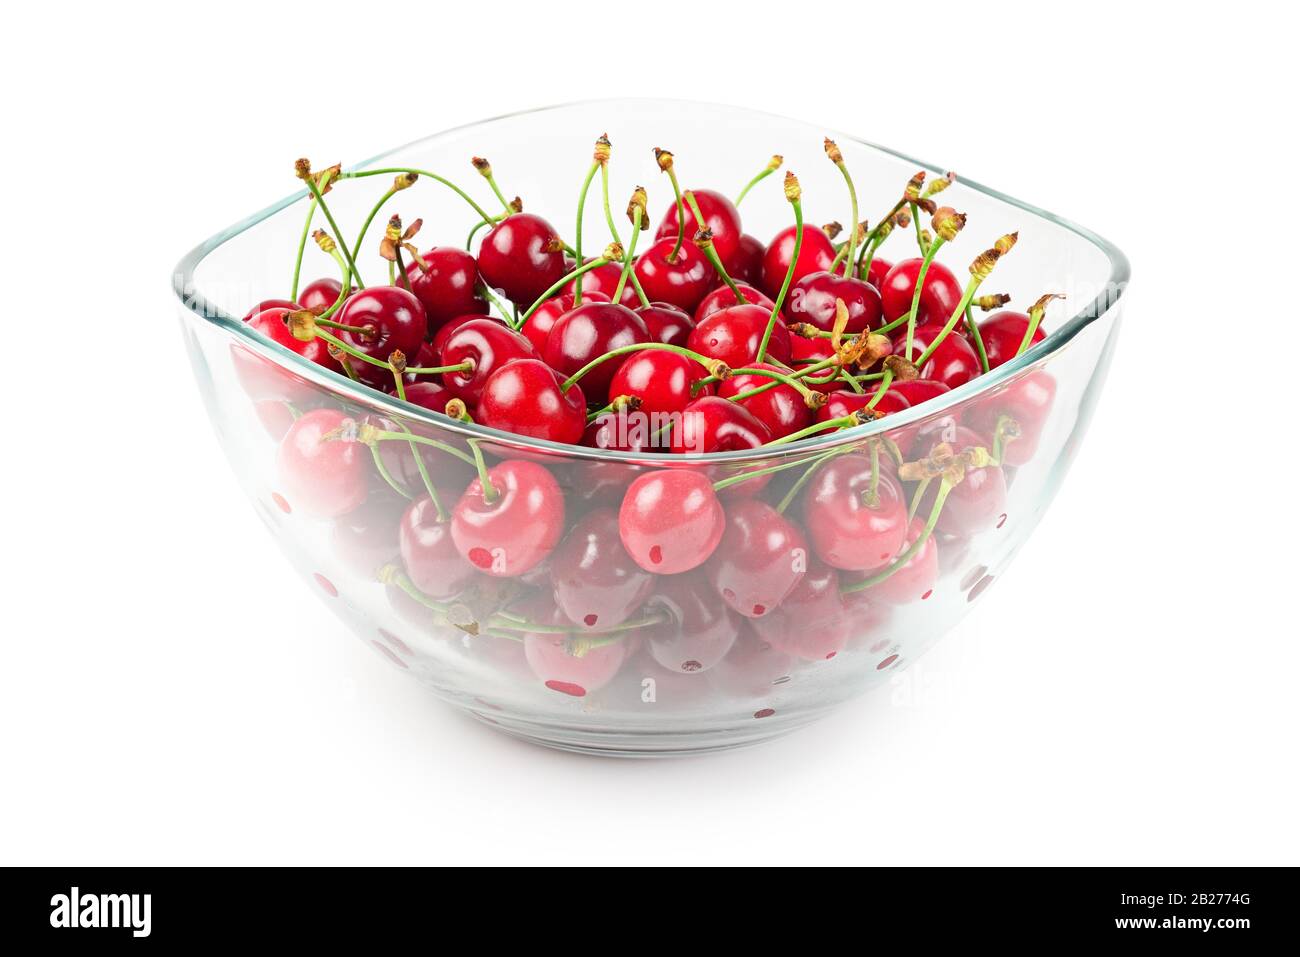 fruits of cherries in a glass bowl Stock Photo